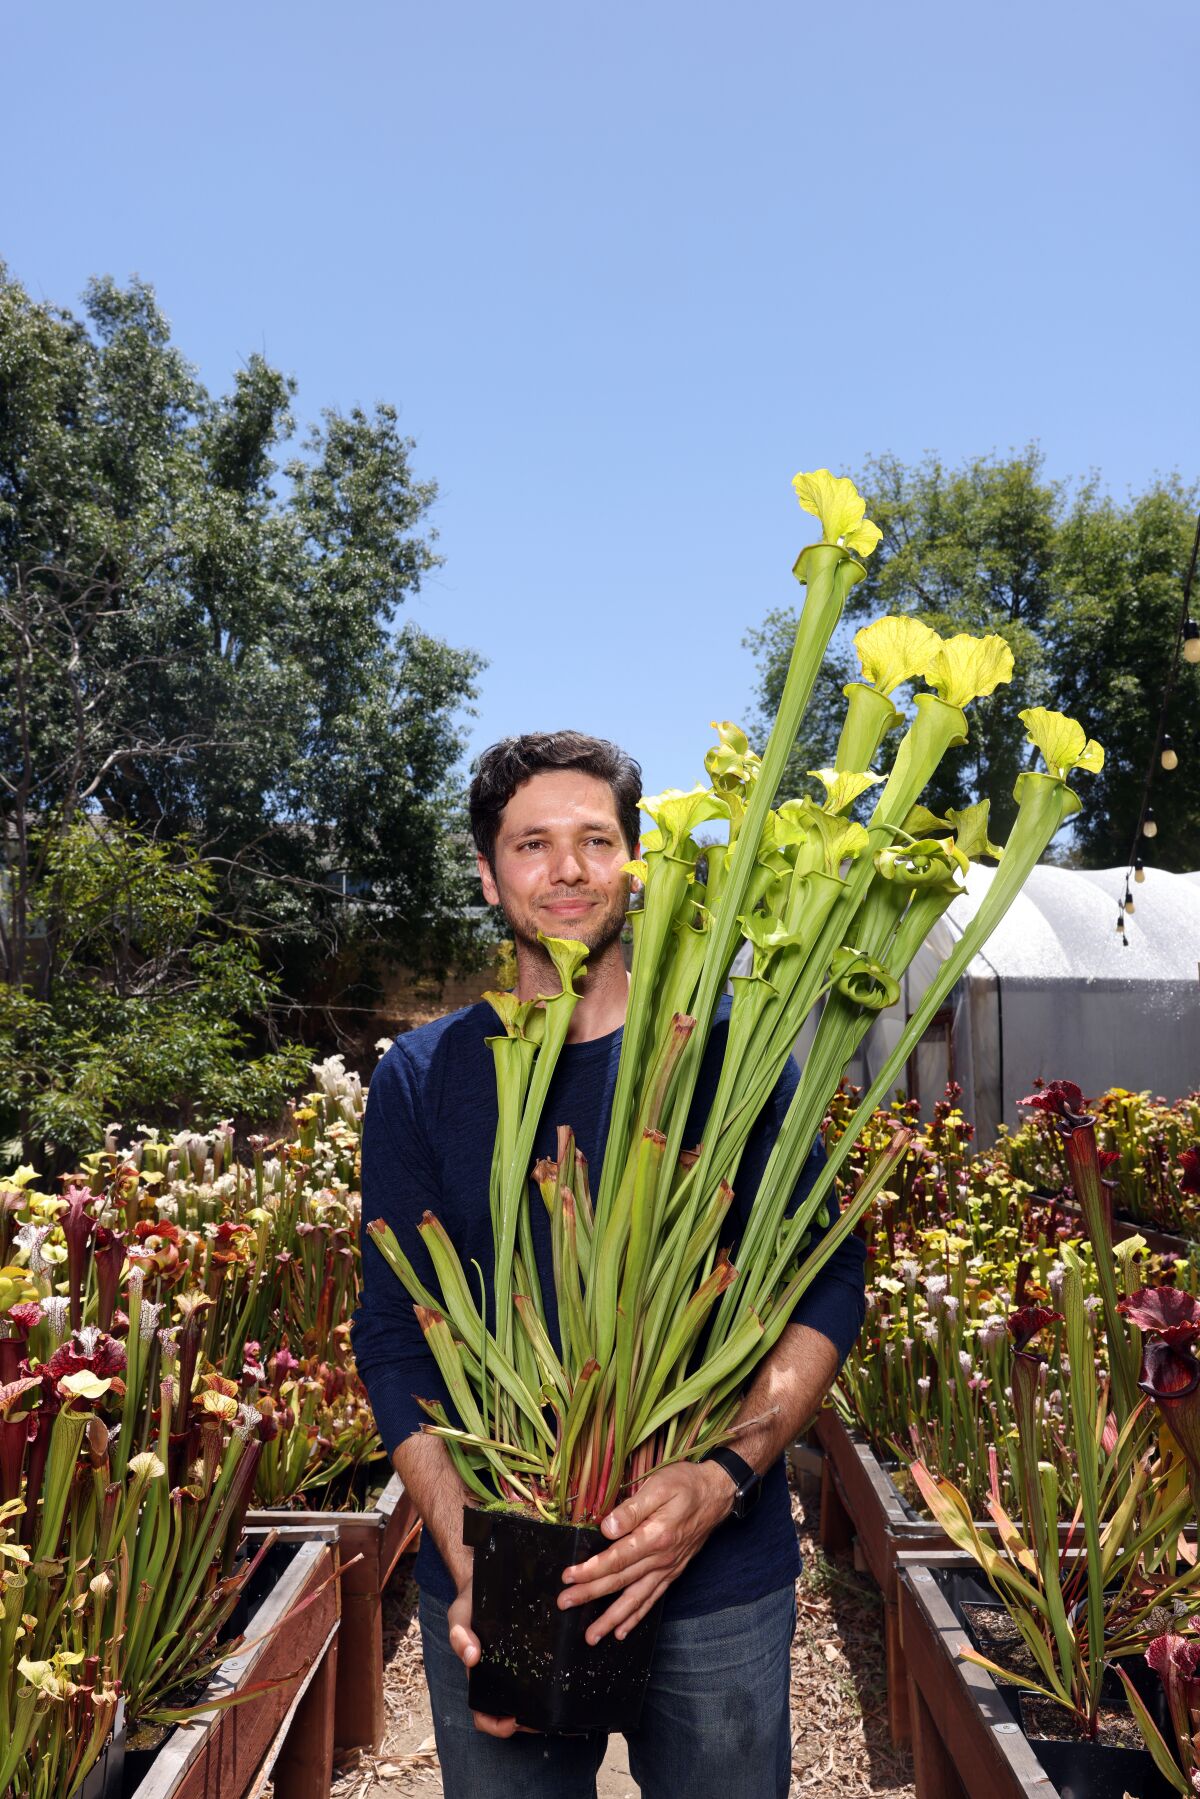 David Fefferman stands for a portrait holding a North American Pitcher Plant at his home nursery.